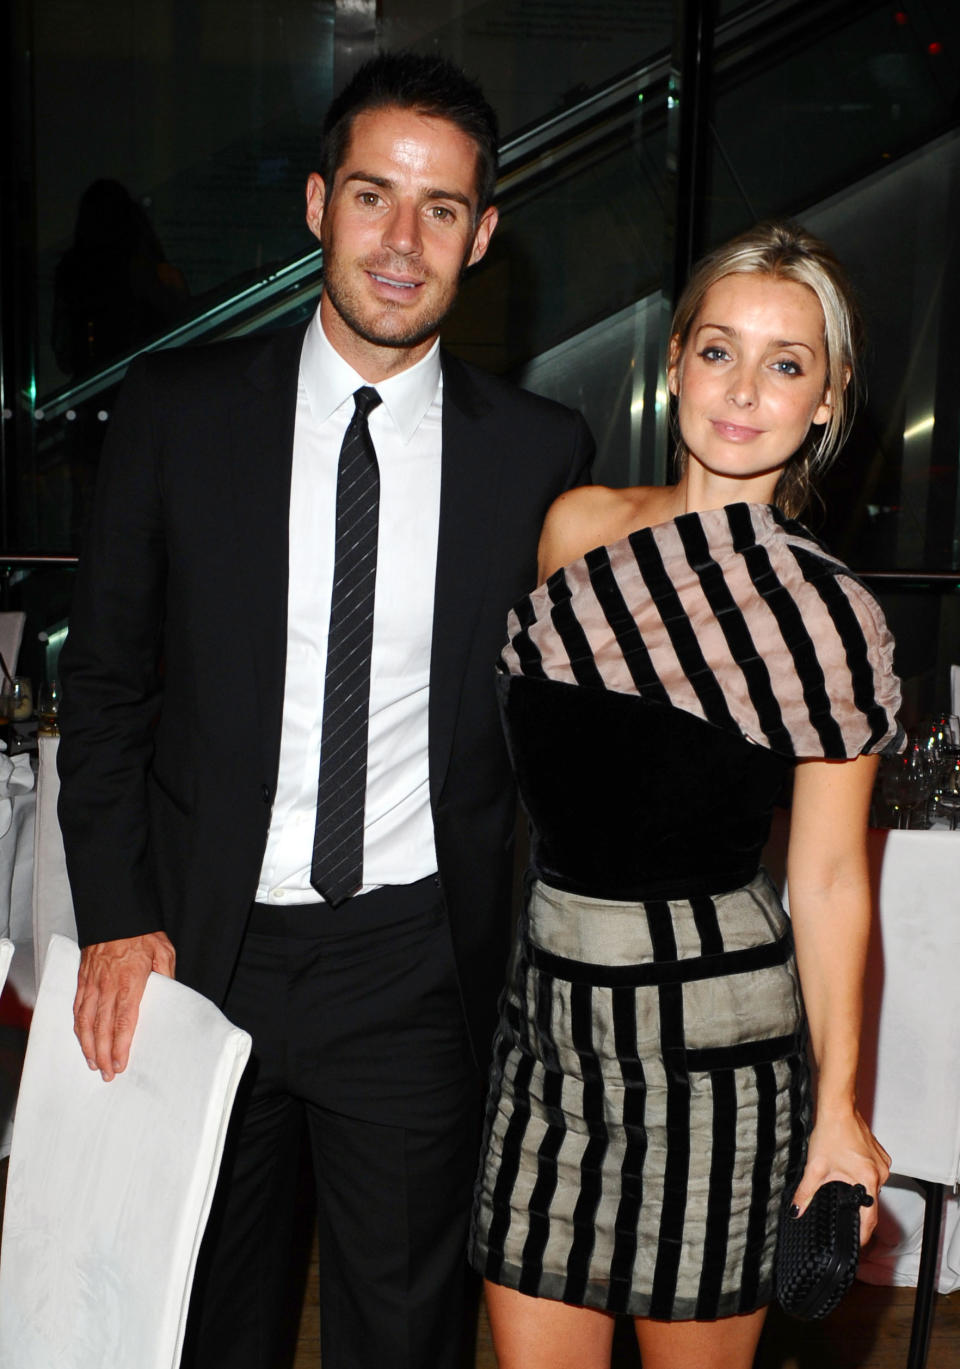 Jamie and Louise Redknapp at the after show party of the GQ Awards held at the Royal Opera House, Covent Garden, London.